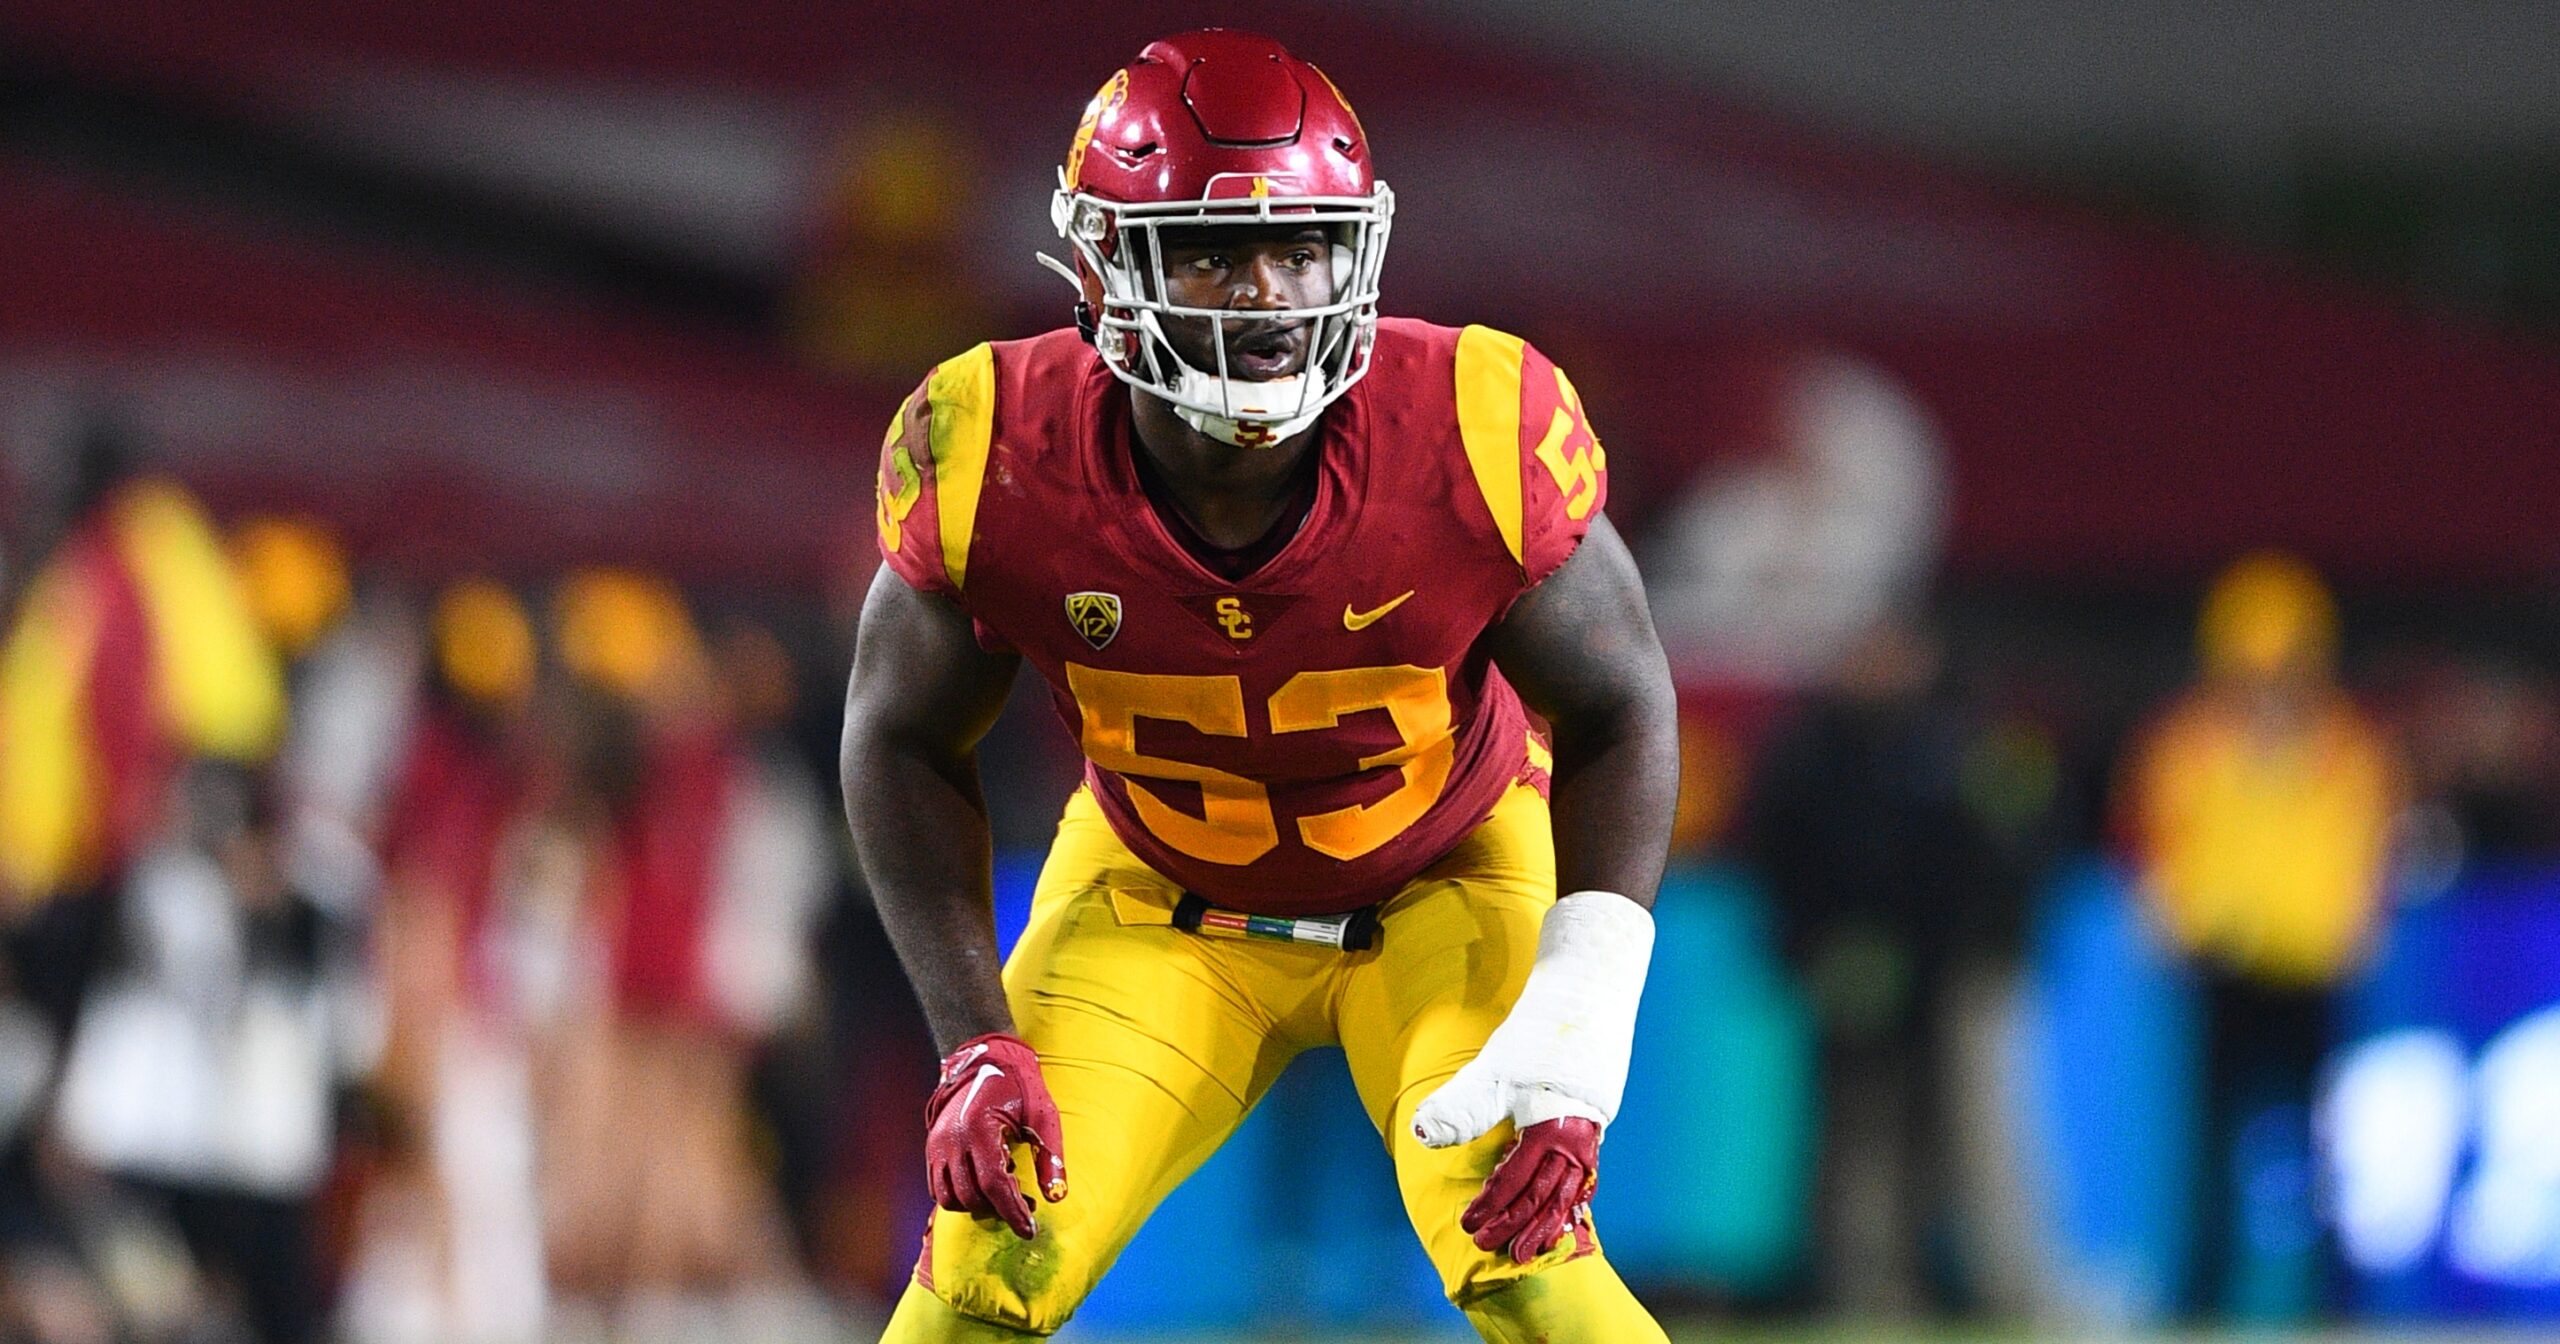 Shane Lee reveals that he will return to USC in 2023 - On3